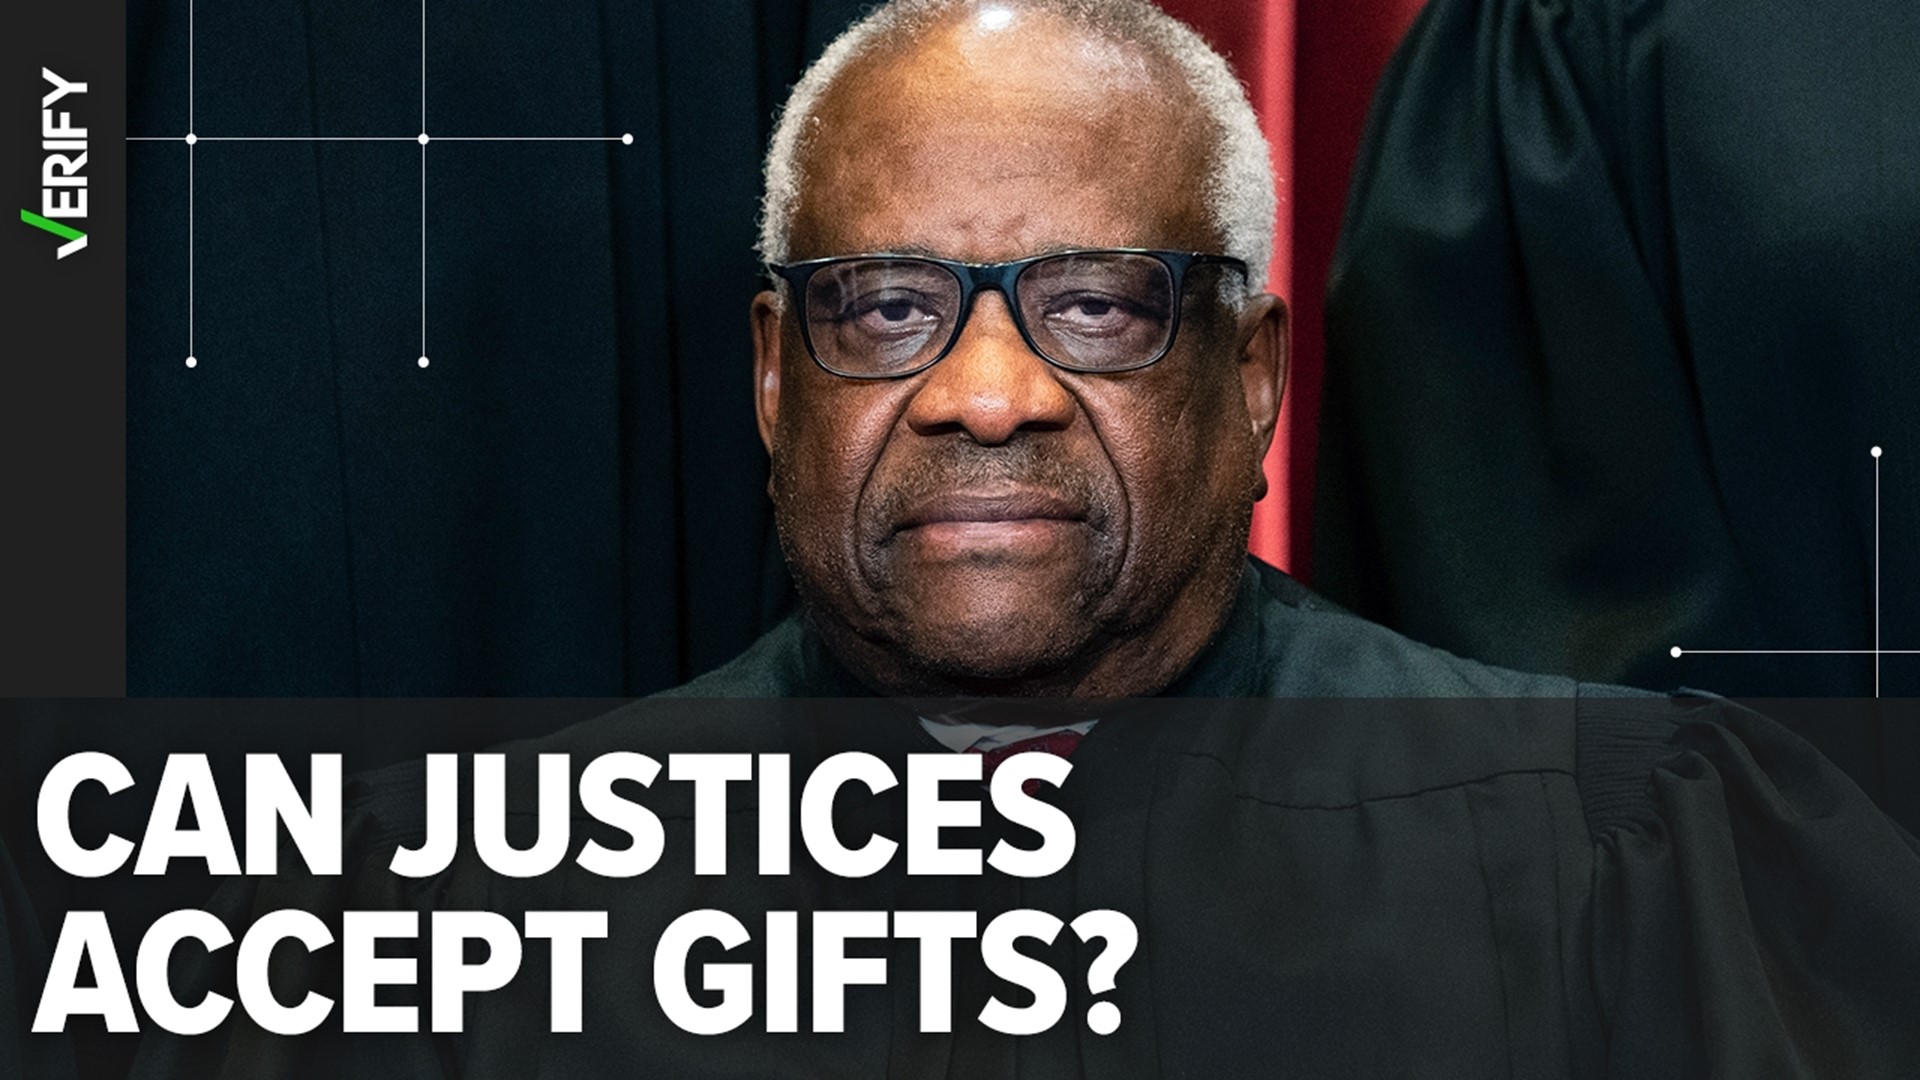 Clarence Thomas may have broken the law by accepting valuable gifts. But the federal gift law is unenforceable for Supreme Court justices.